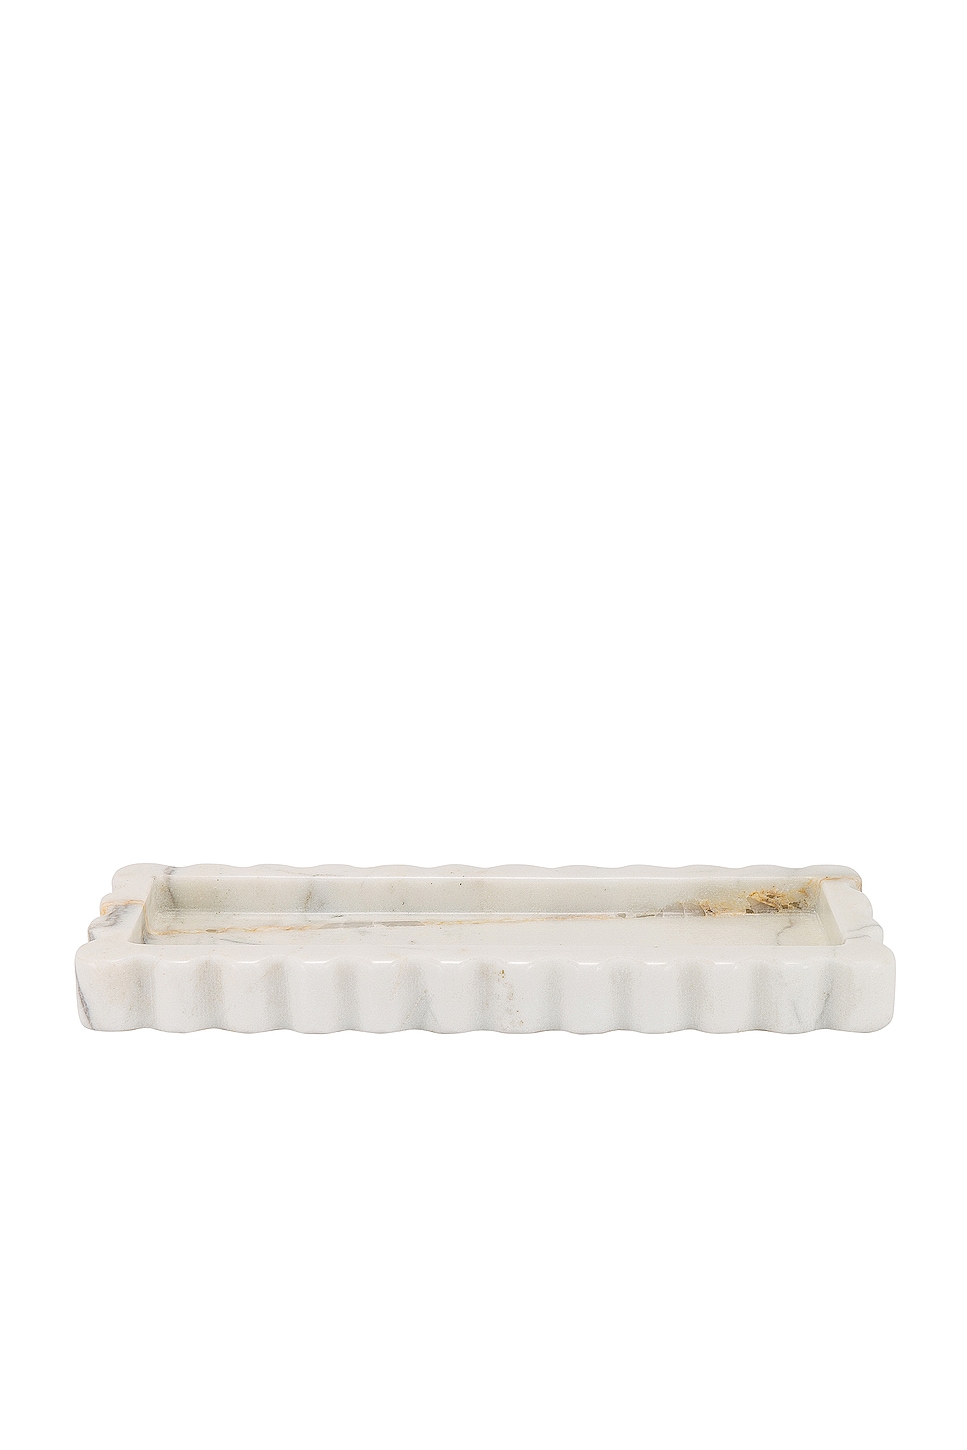 Image 1 of Anastasio Home The 512 Tray in Cloud